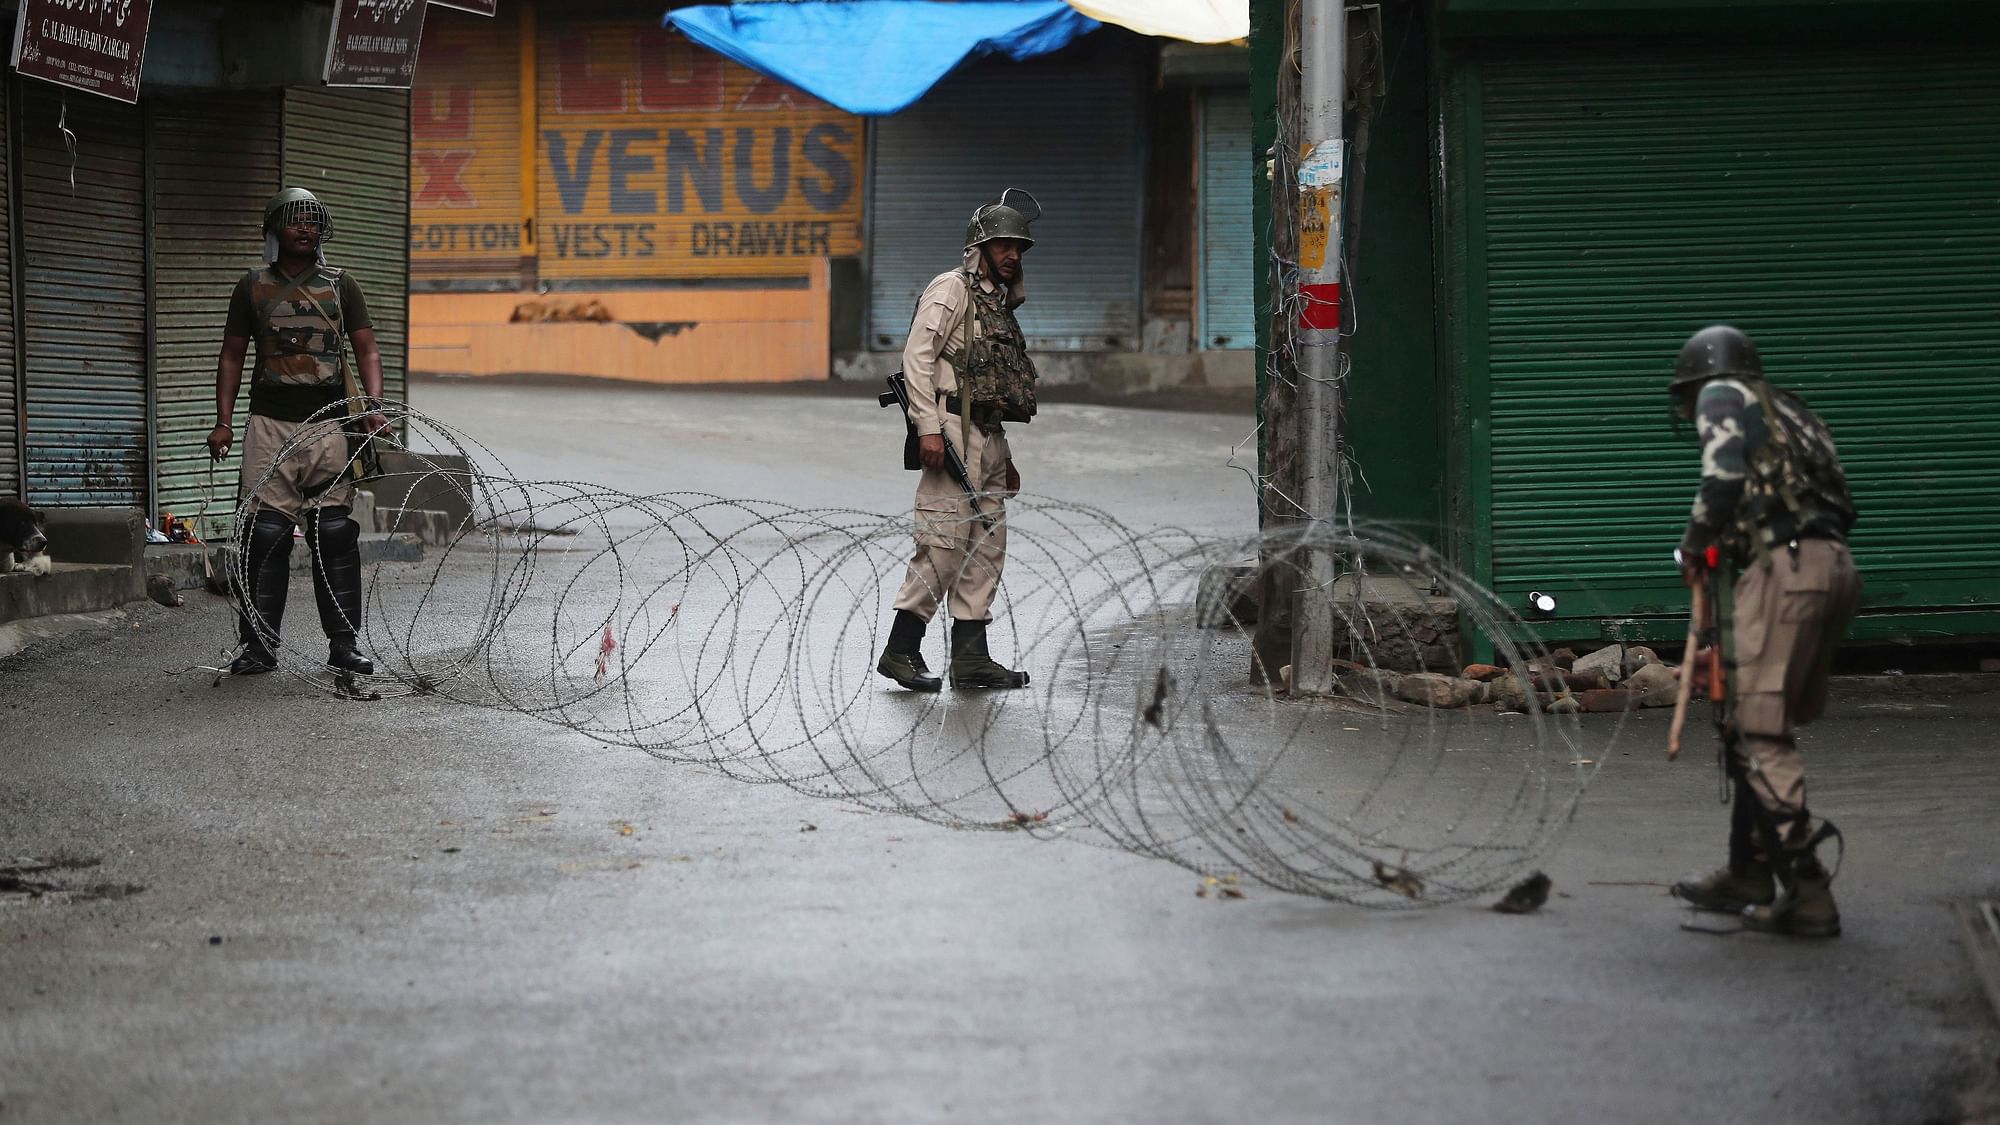  Indian paramilitary soldiers close a street using barbwire in Srinagar, J&amp;K. (Image used for representational purposes only)